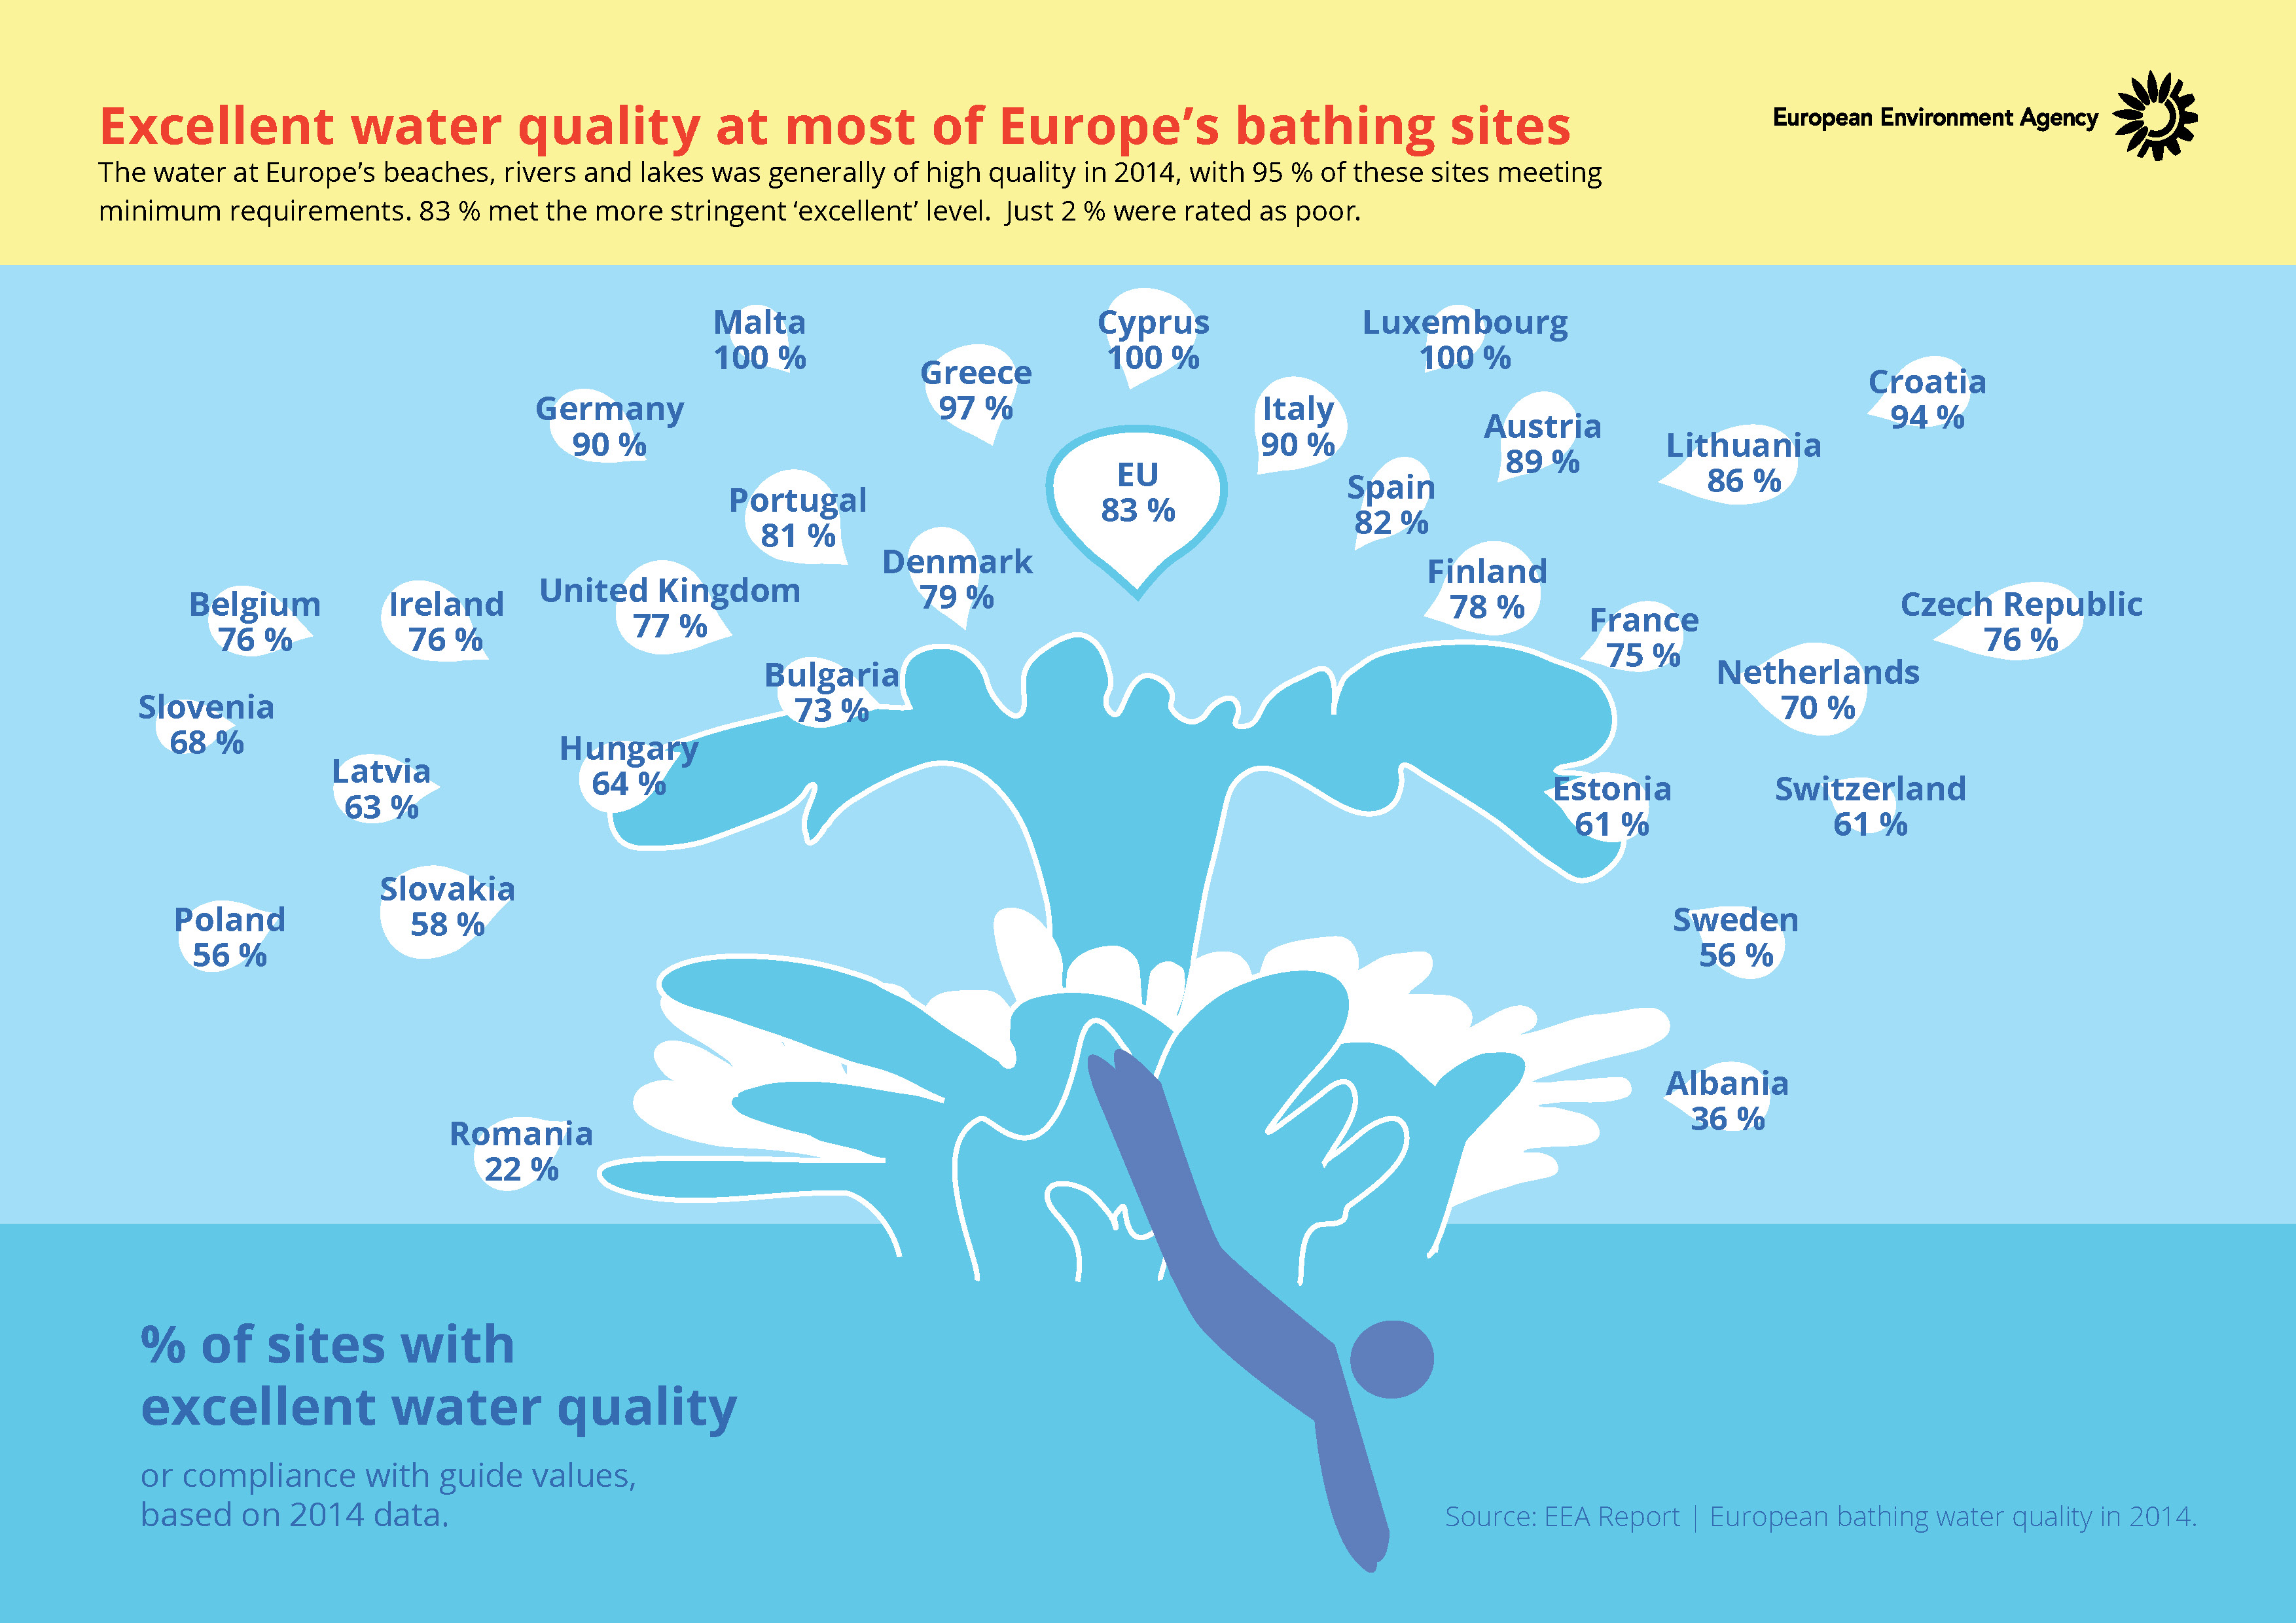 Excellent water quality at most of Europe's bathing sites